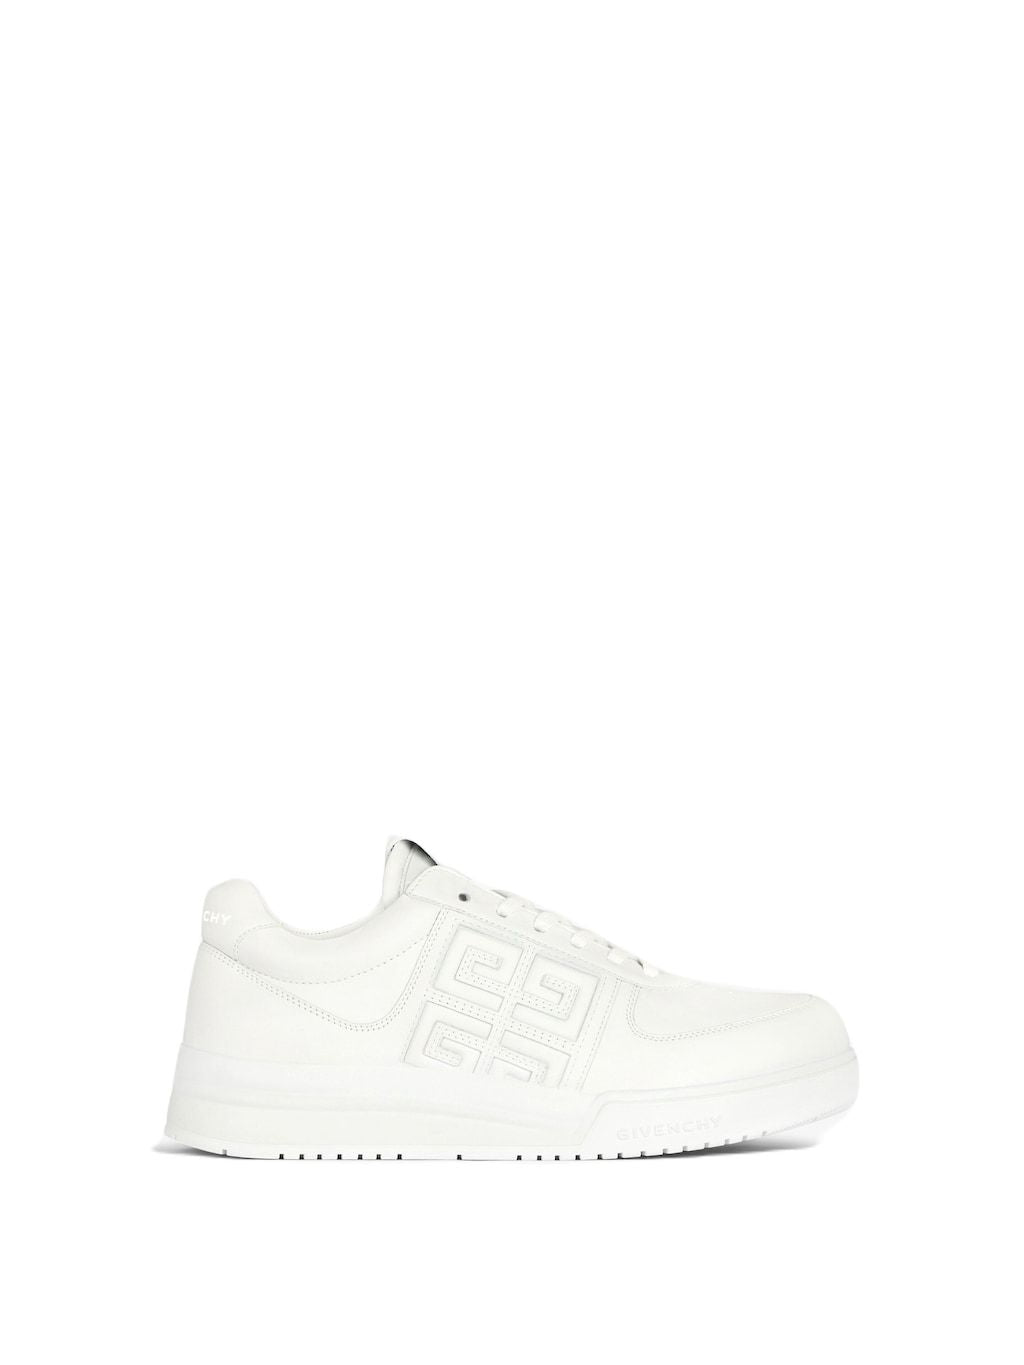 White Low-Top Women's Sneakers with Round Toe and 100% Leather Upper